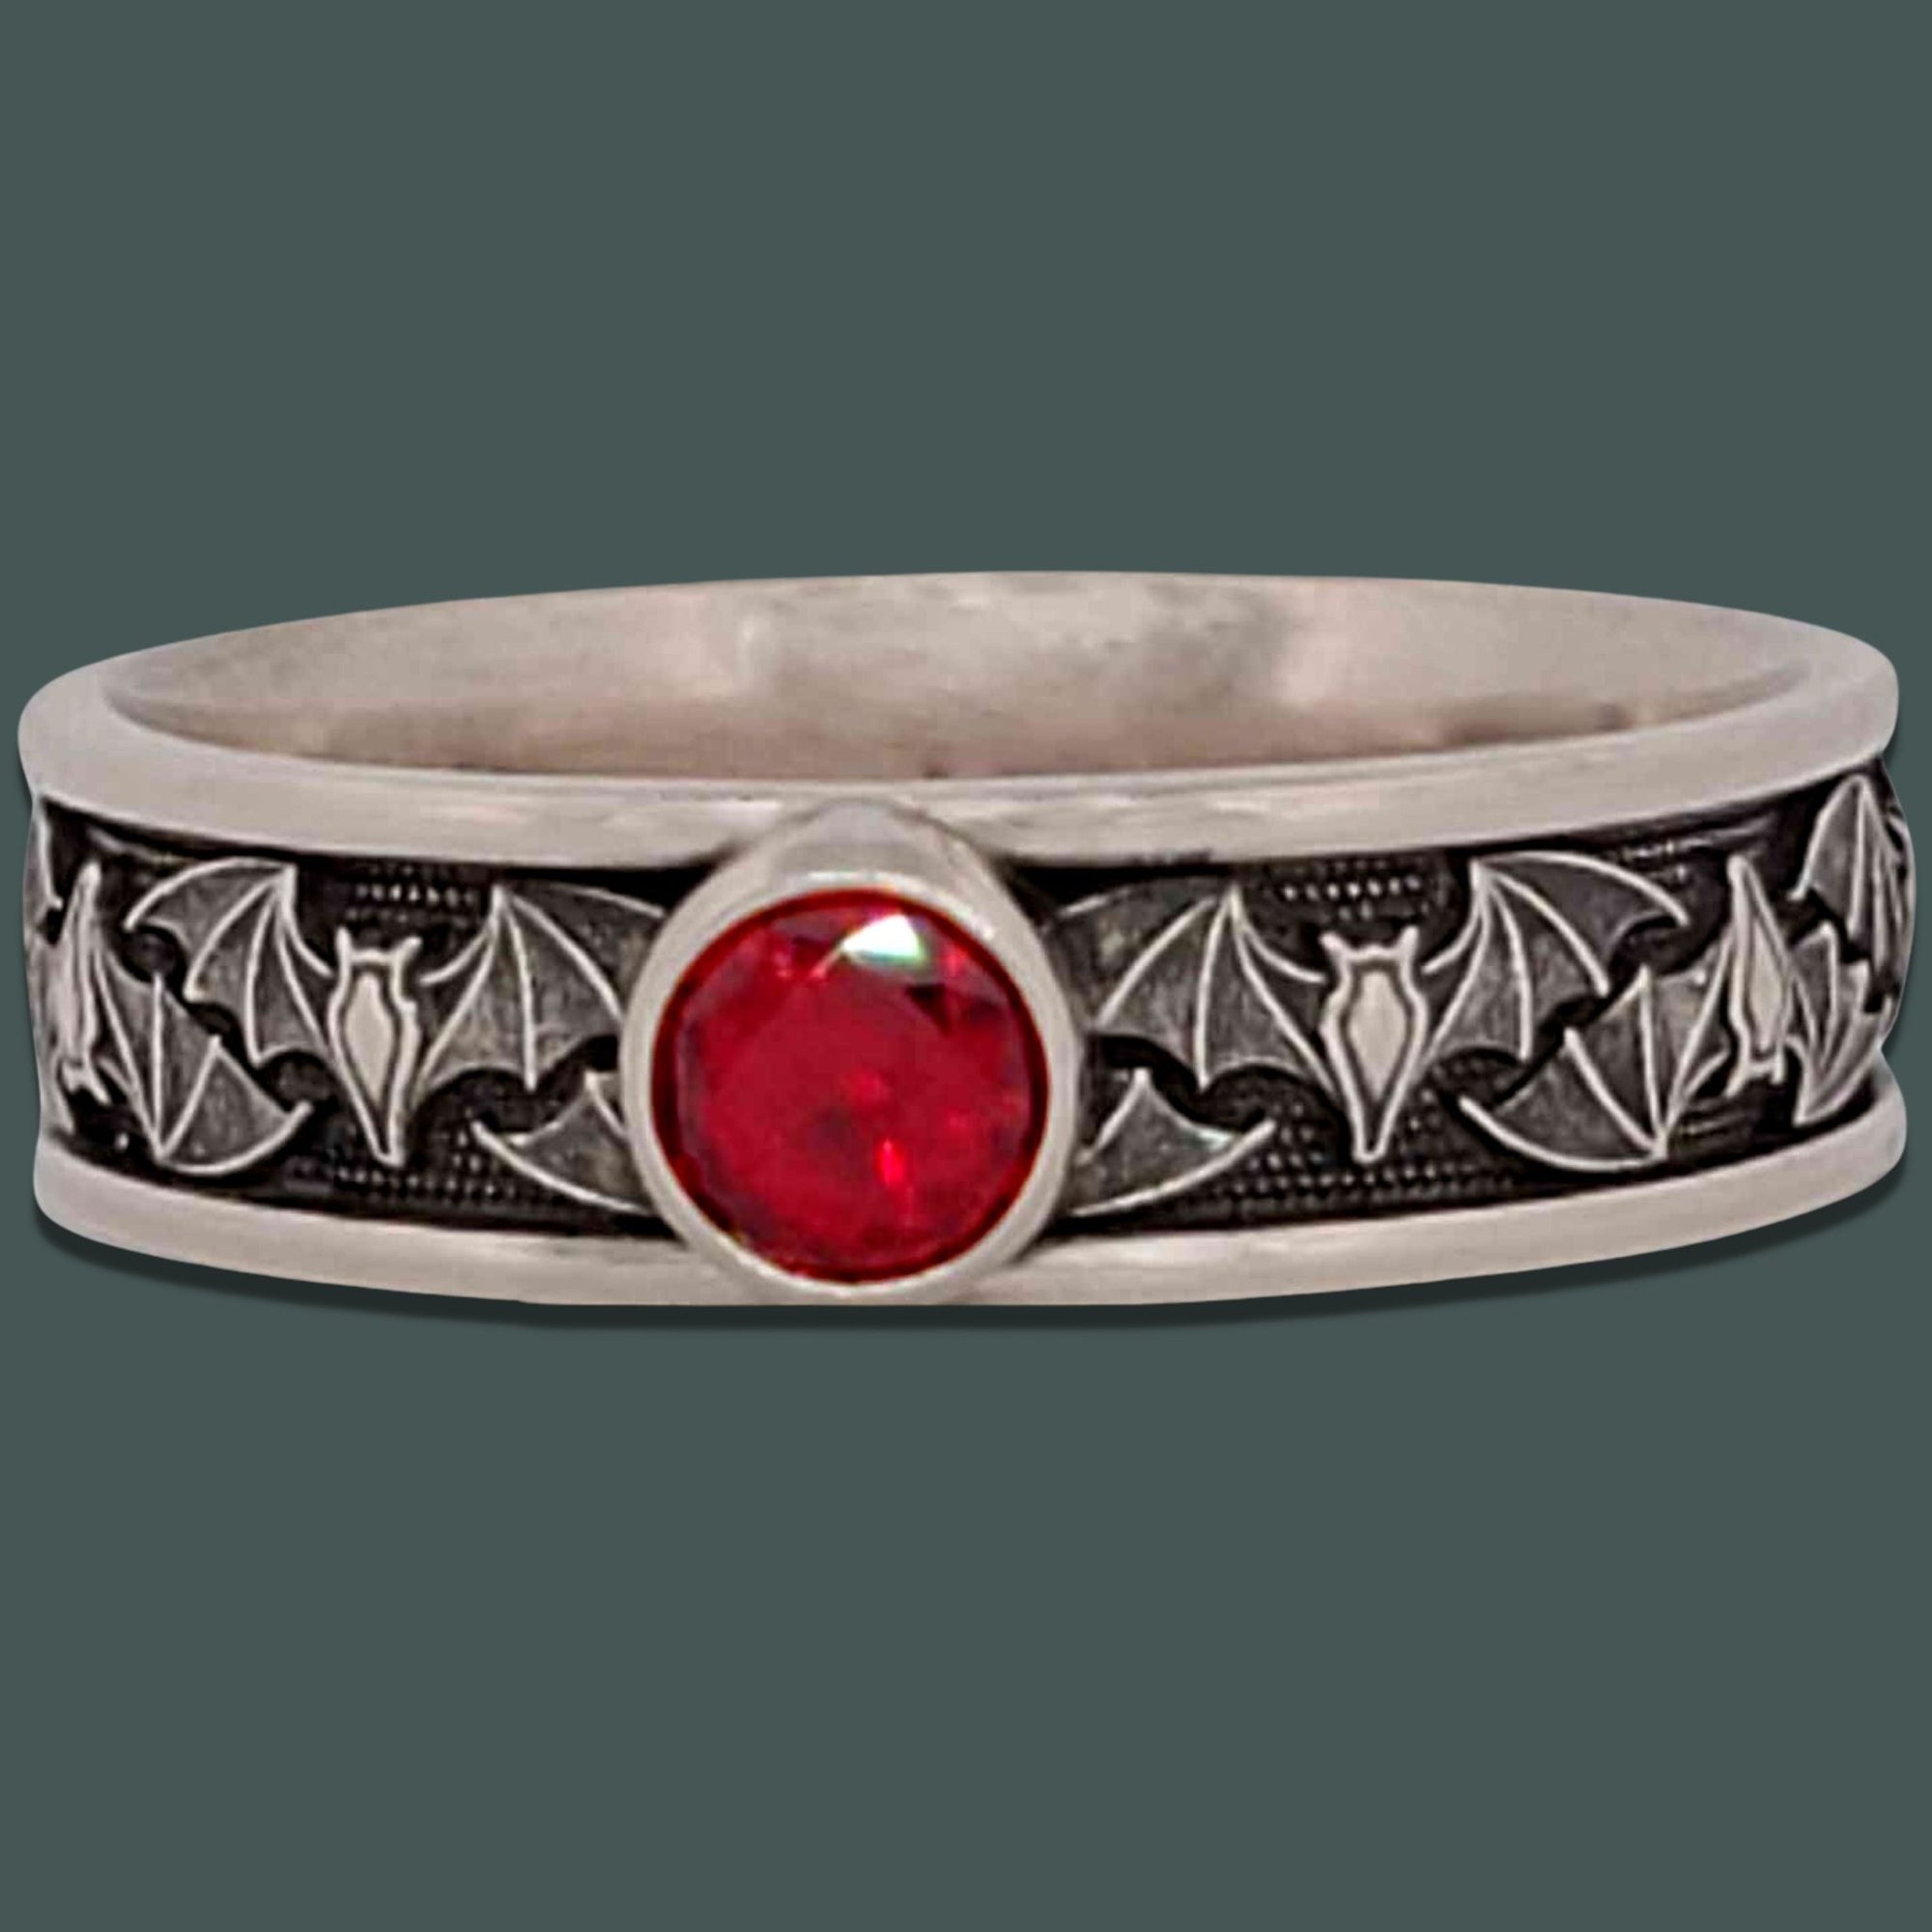 BAT NARROW SOLITAIRE Band Ring in SILVER with CHOICE OF 5mm GEMSTONE - Starting at $189 - Celtic Jewelscapes